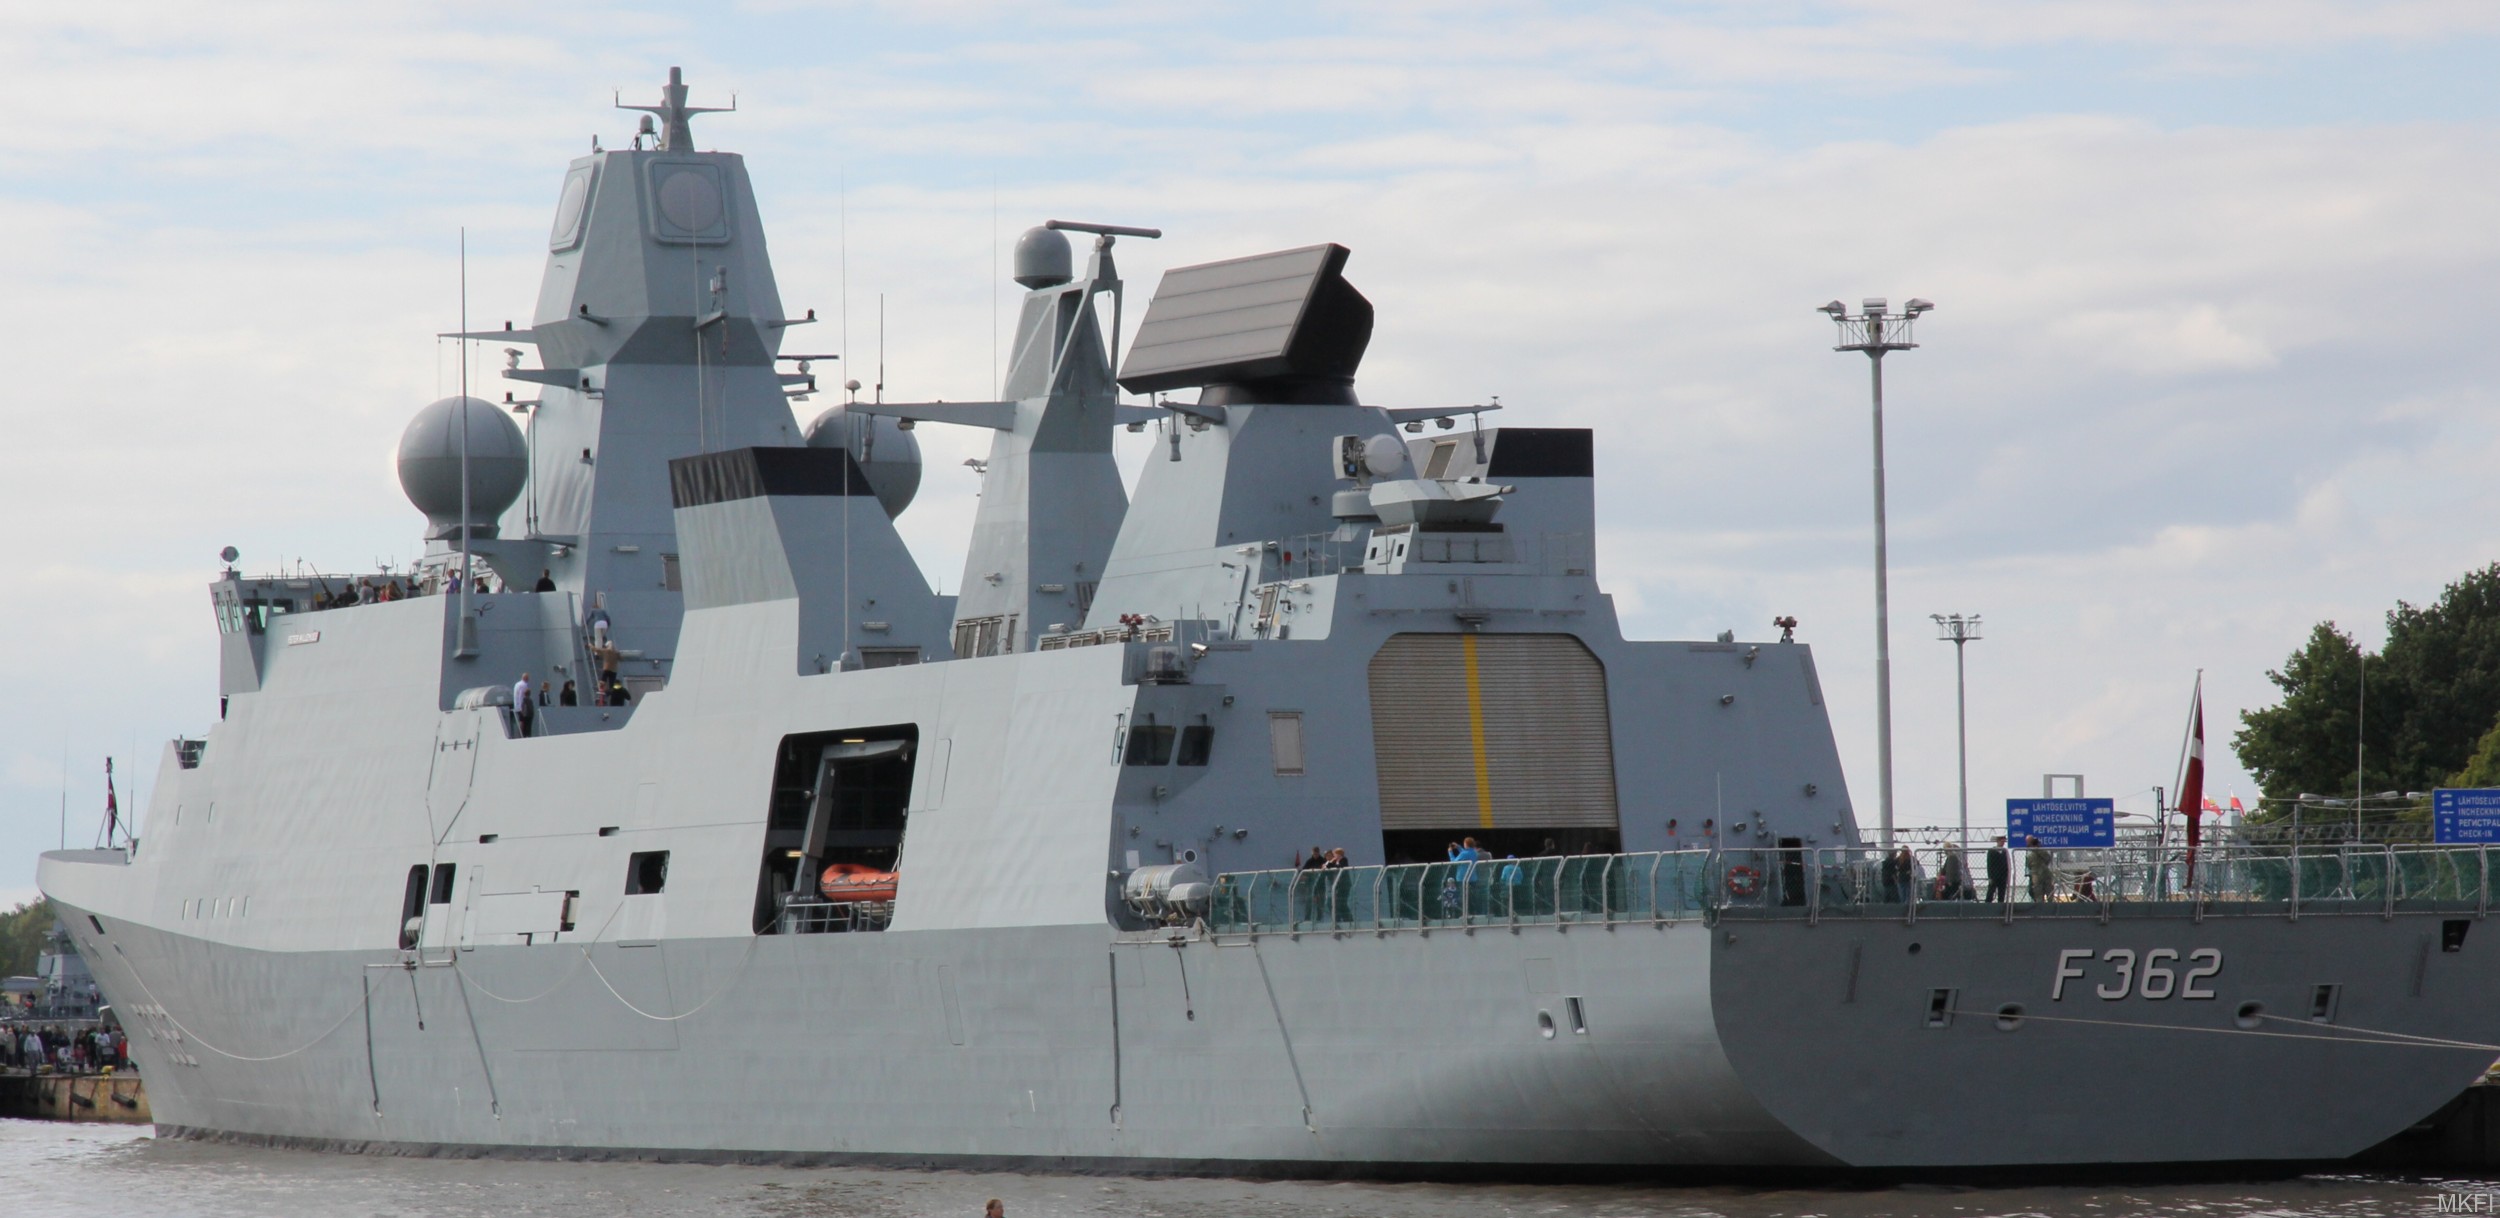 f-362 hdms peter willemoes iver huitfeldt class guided missile frigate ffg royal danish navy 04